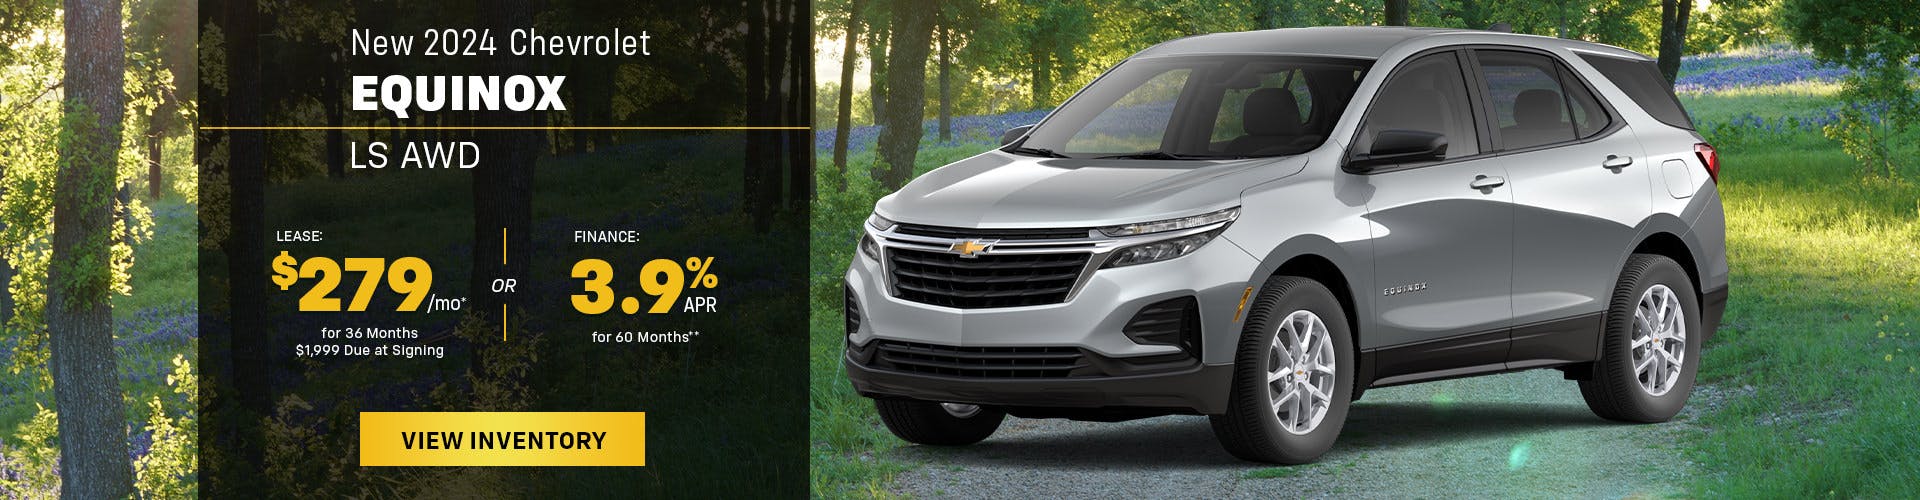 New 2024 Chevrolet Equinox Lease for $279/Month or Finance 3.9% APR